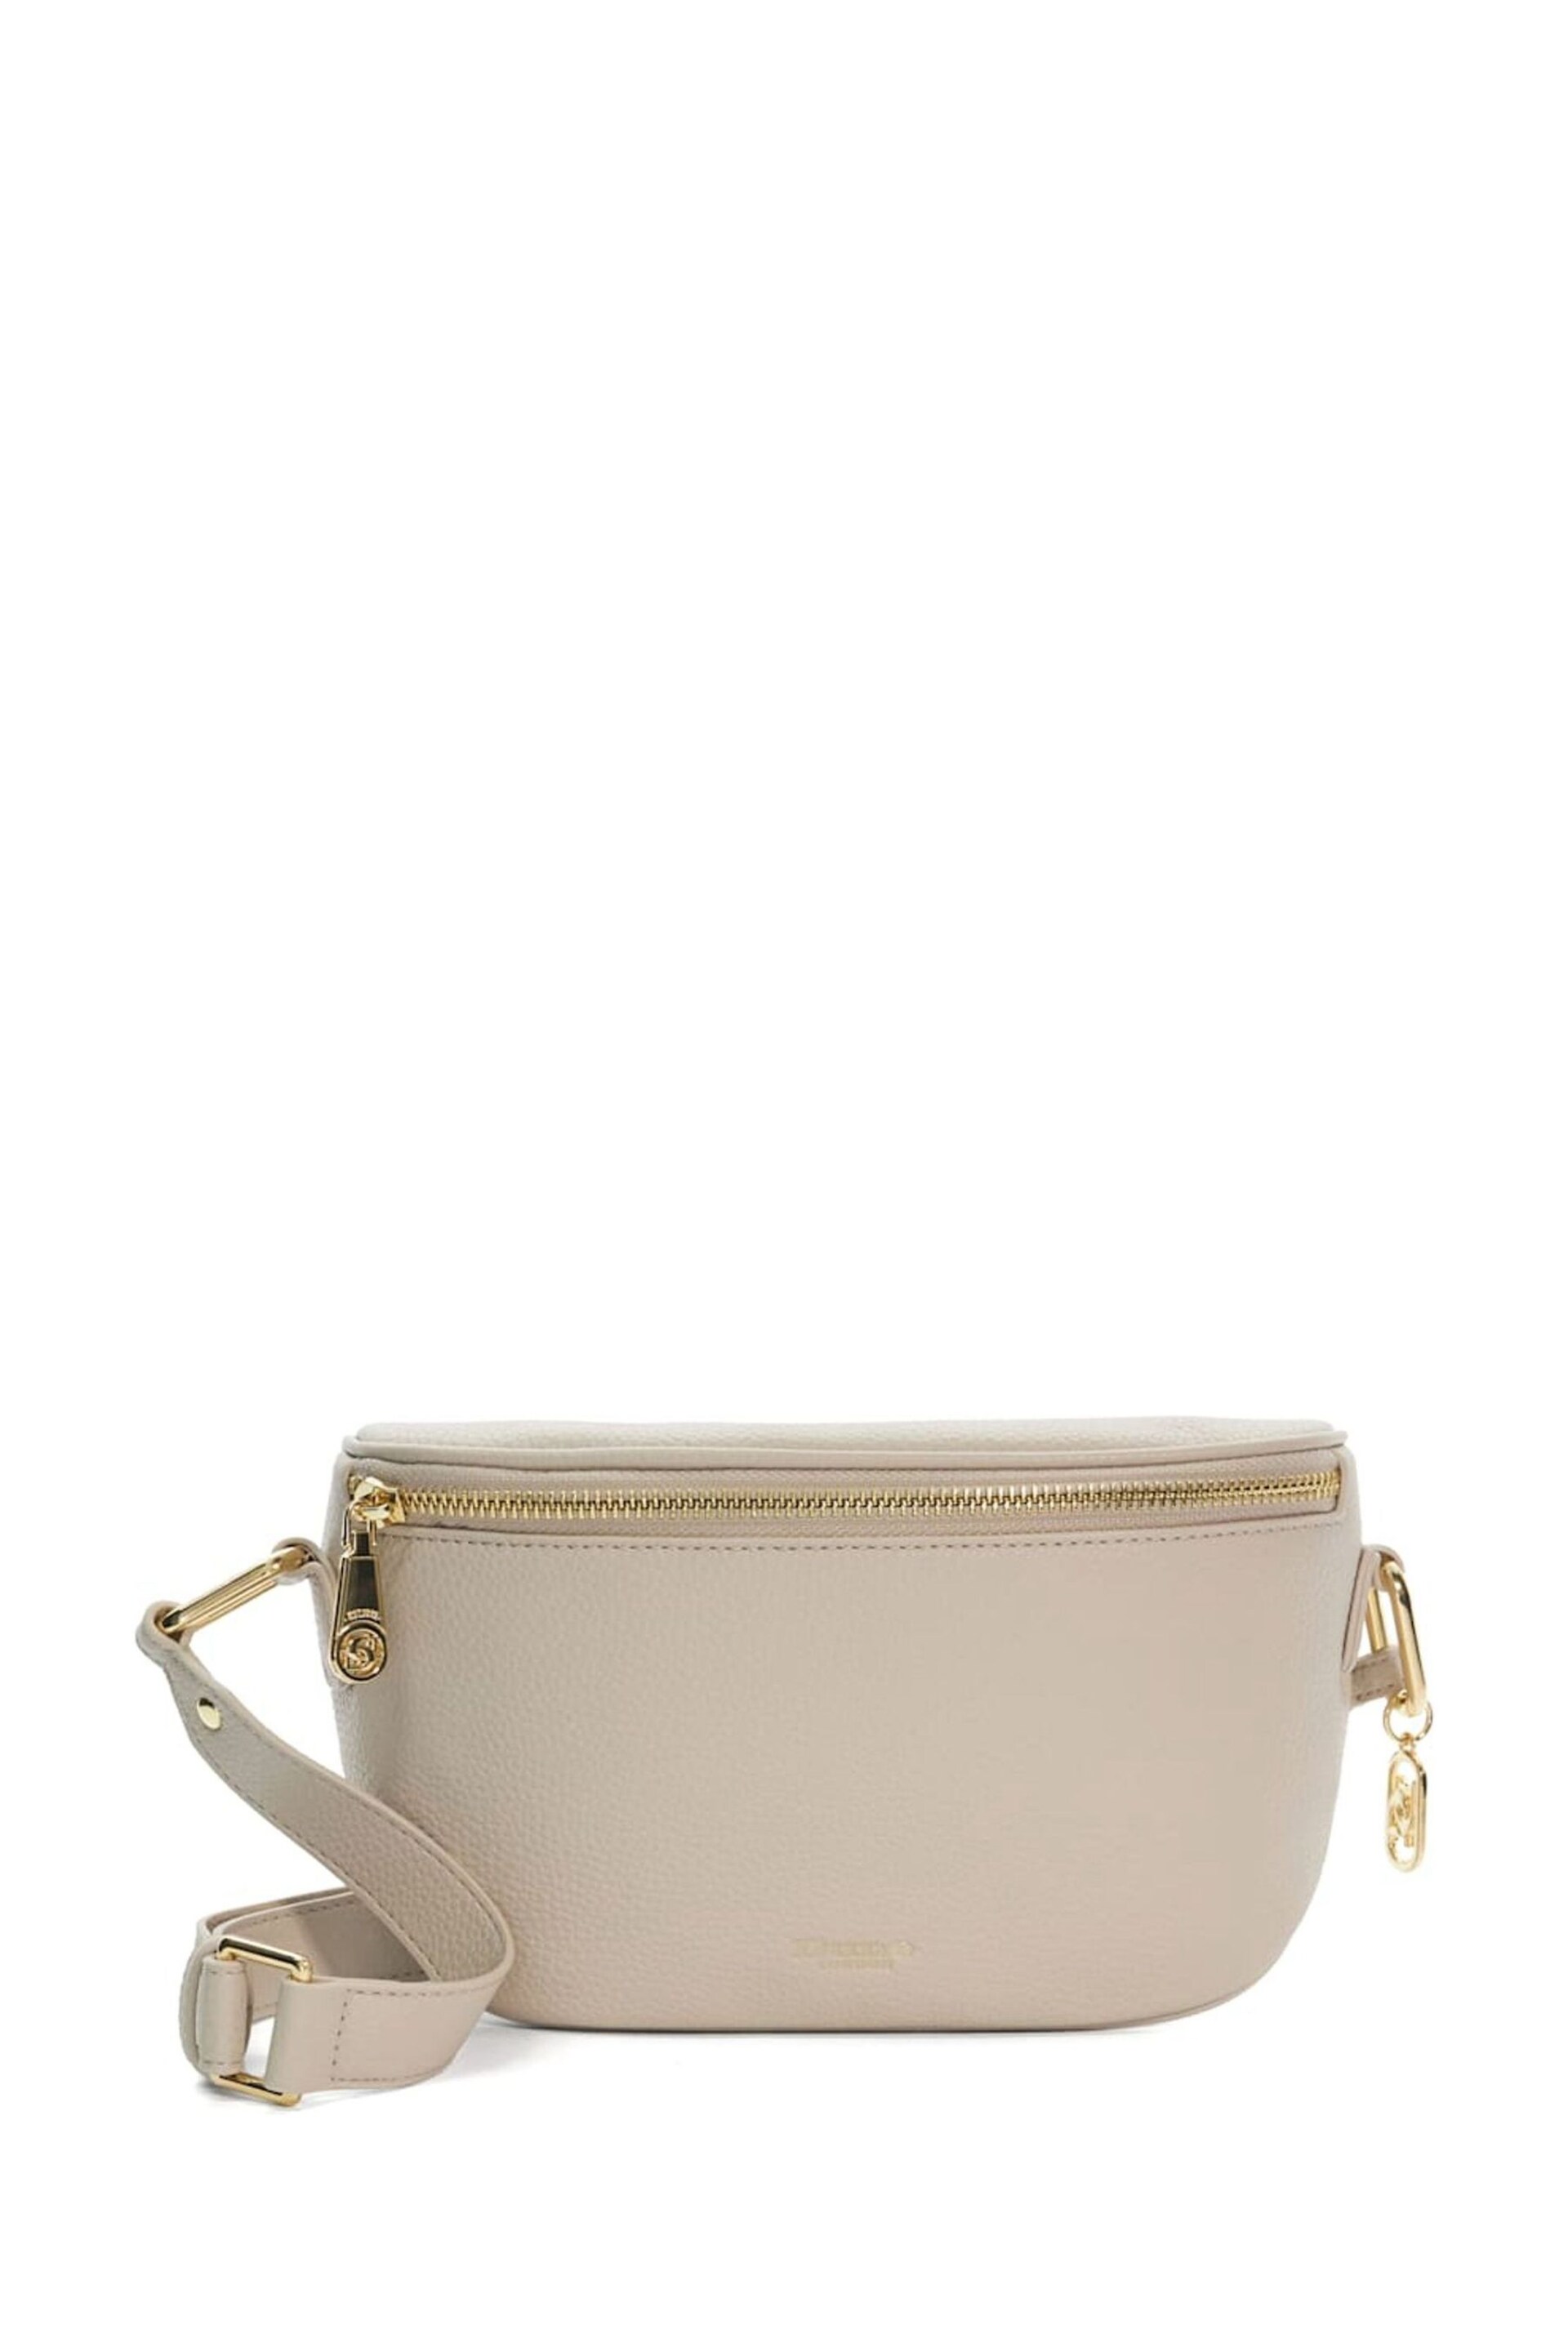 Dune London Cream Small Dent Curved Cross-Body Bag - Image 1 of 6